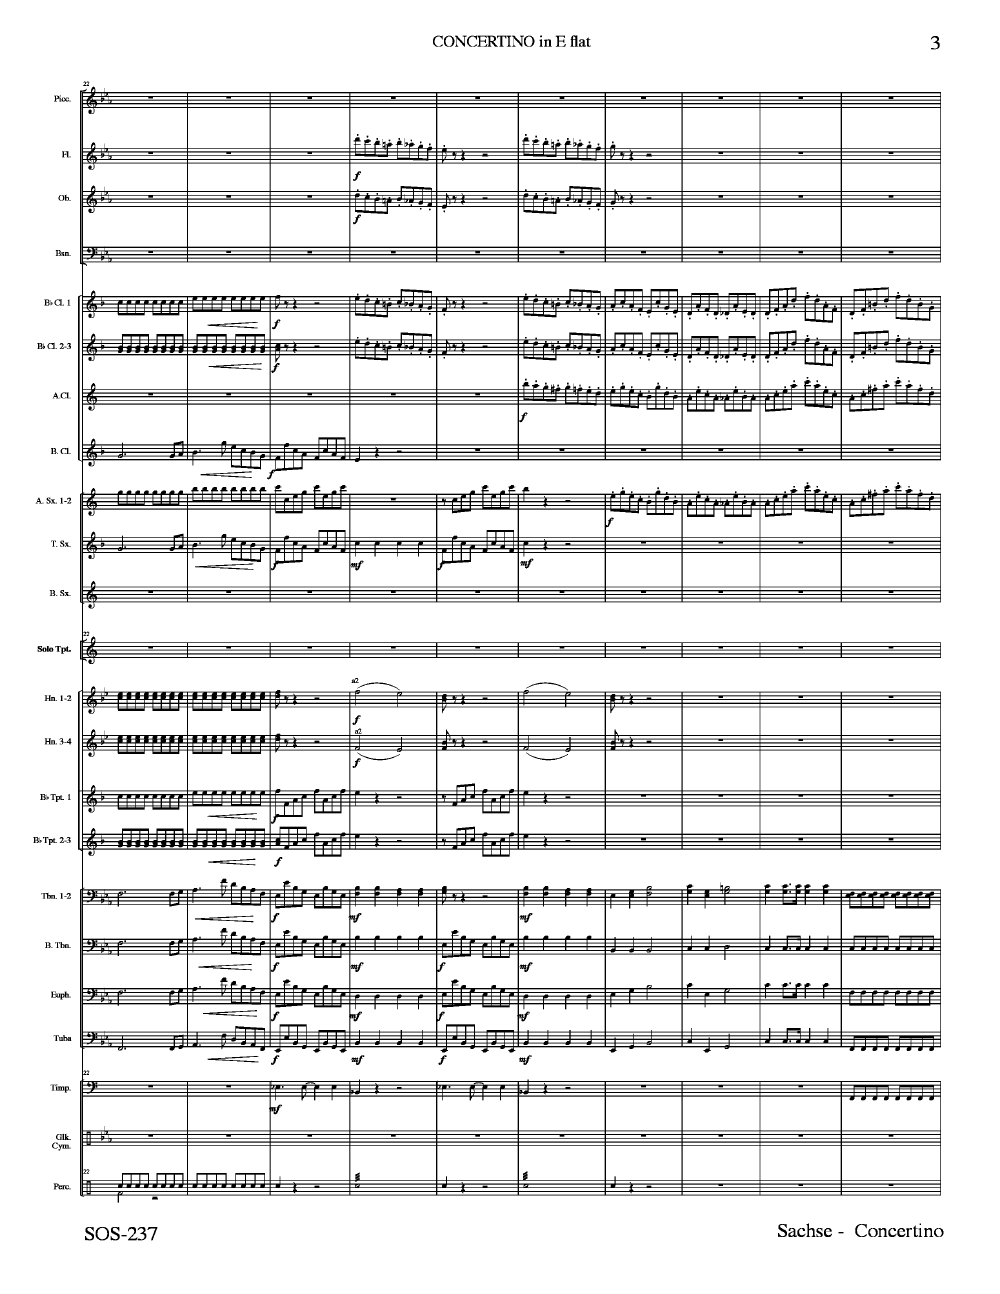 CONCERTINO IN E FLAT E FLAT TRUMPET AND BAND